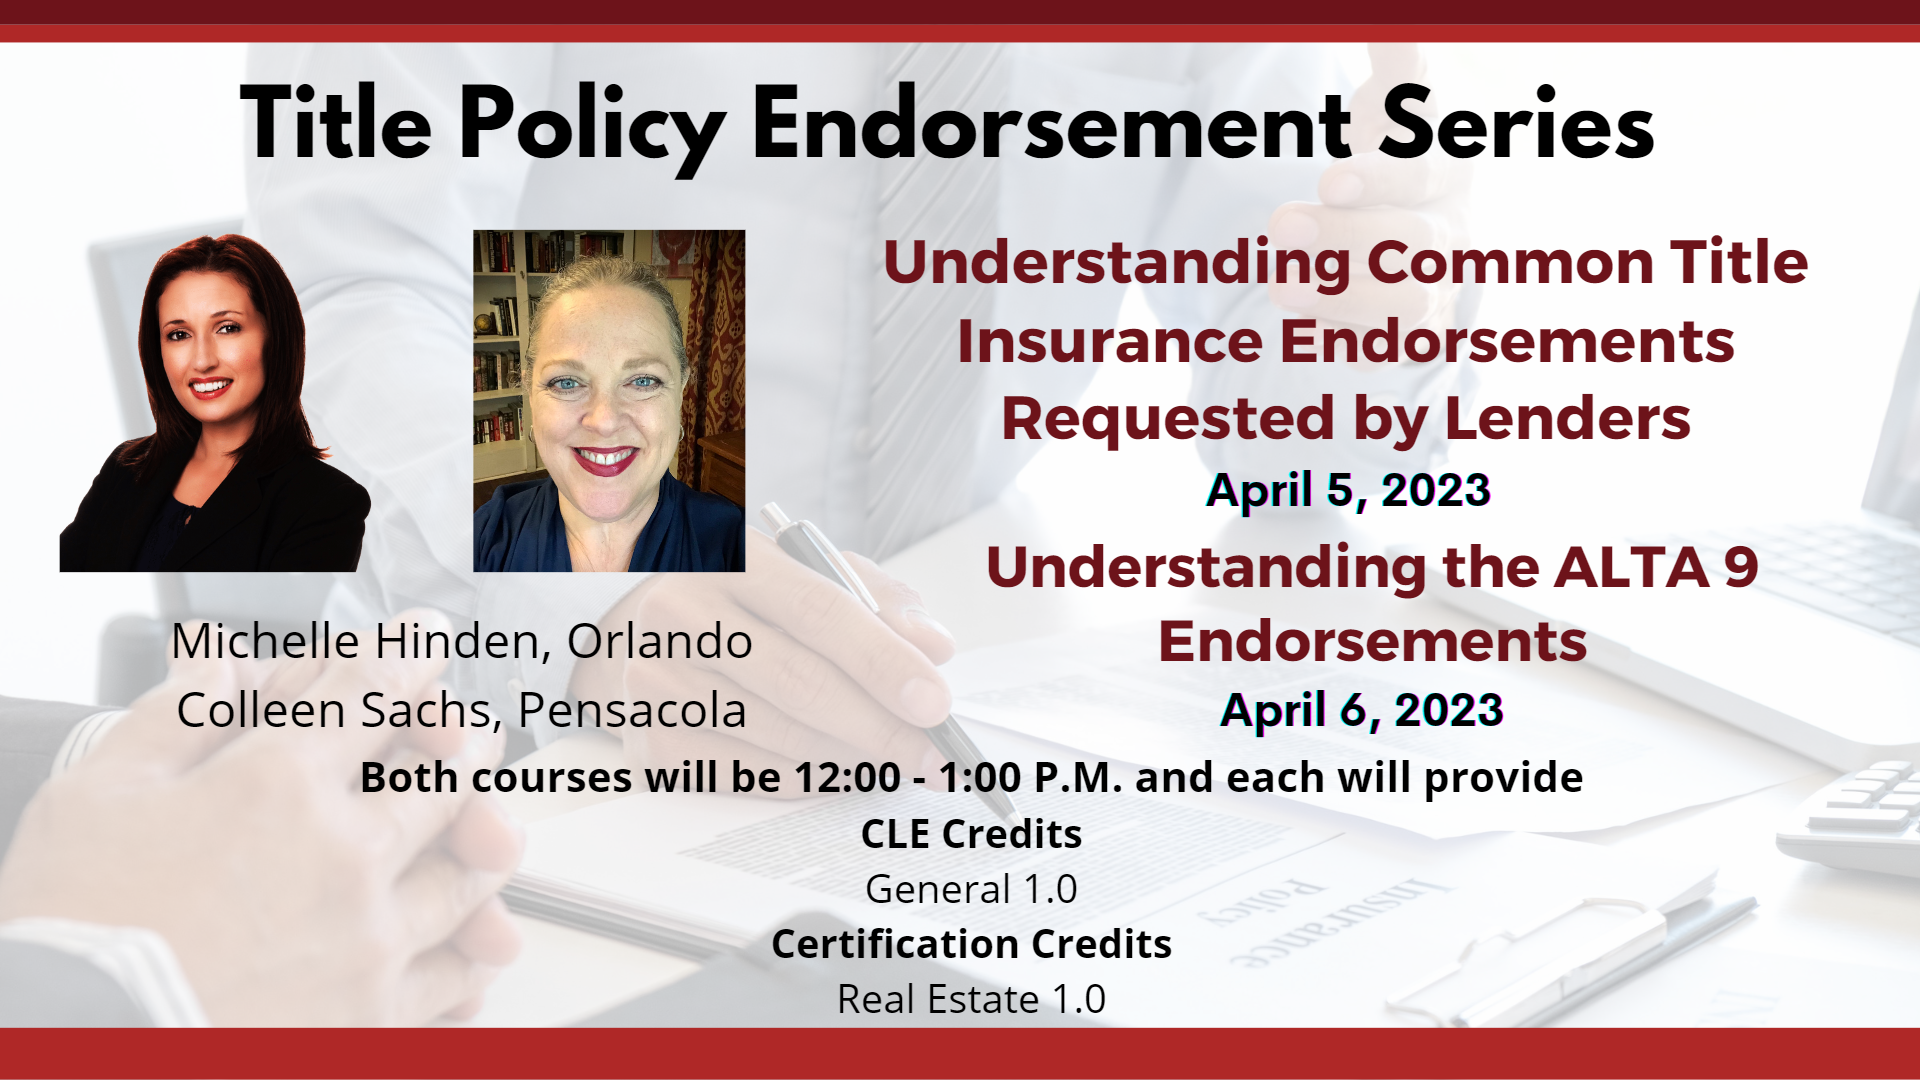 Endorsement Series: Understanding Common Title Insurance Endorsements Requested by Lenders